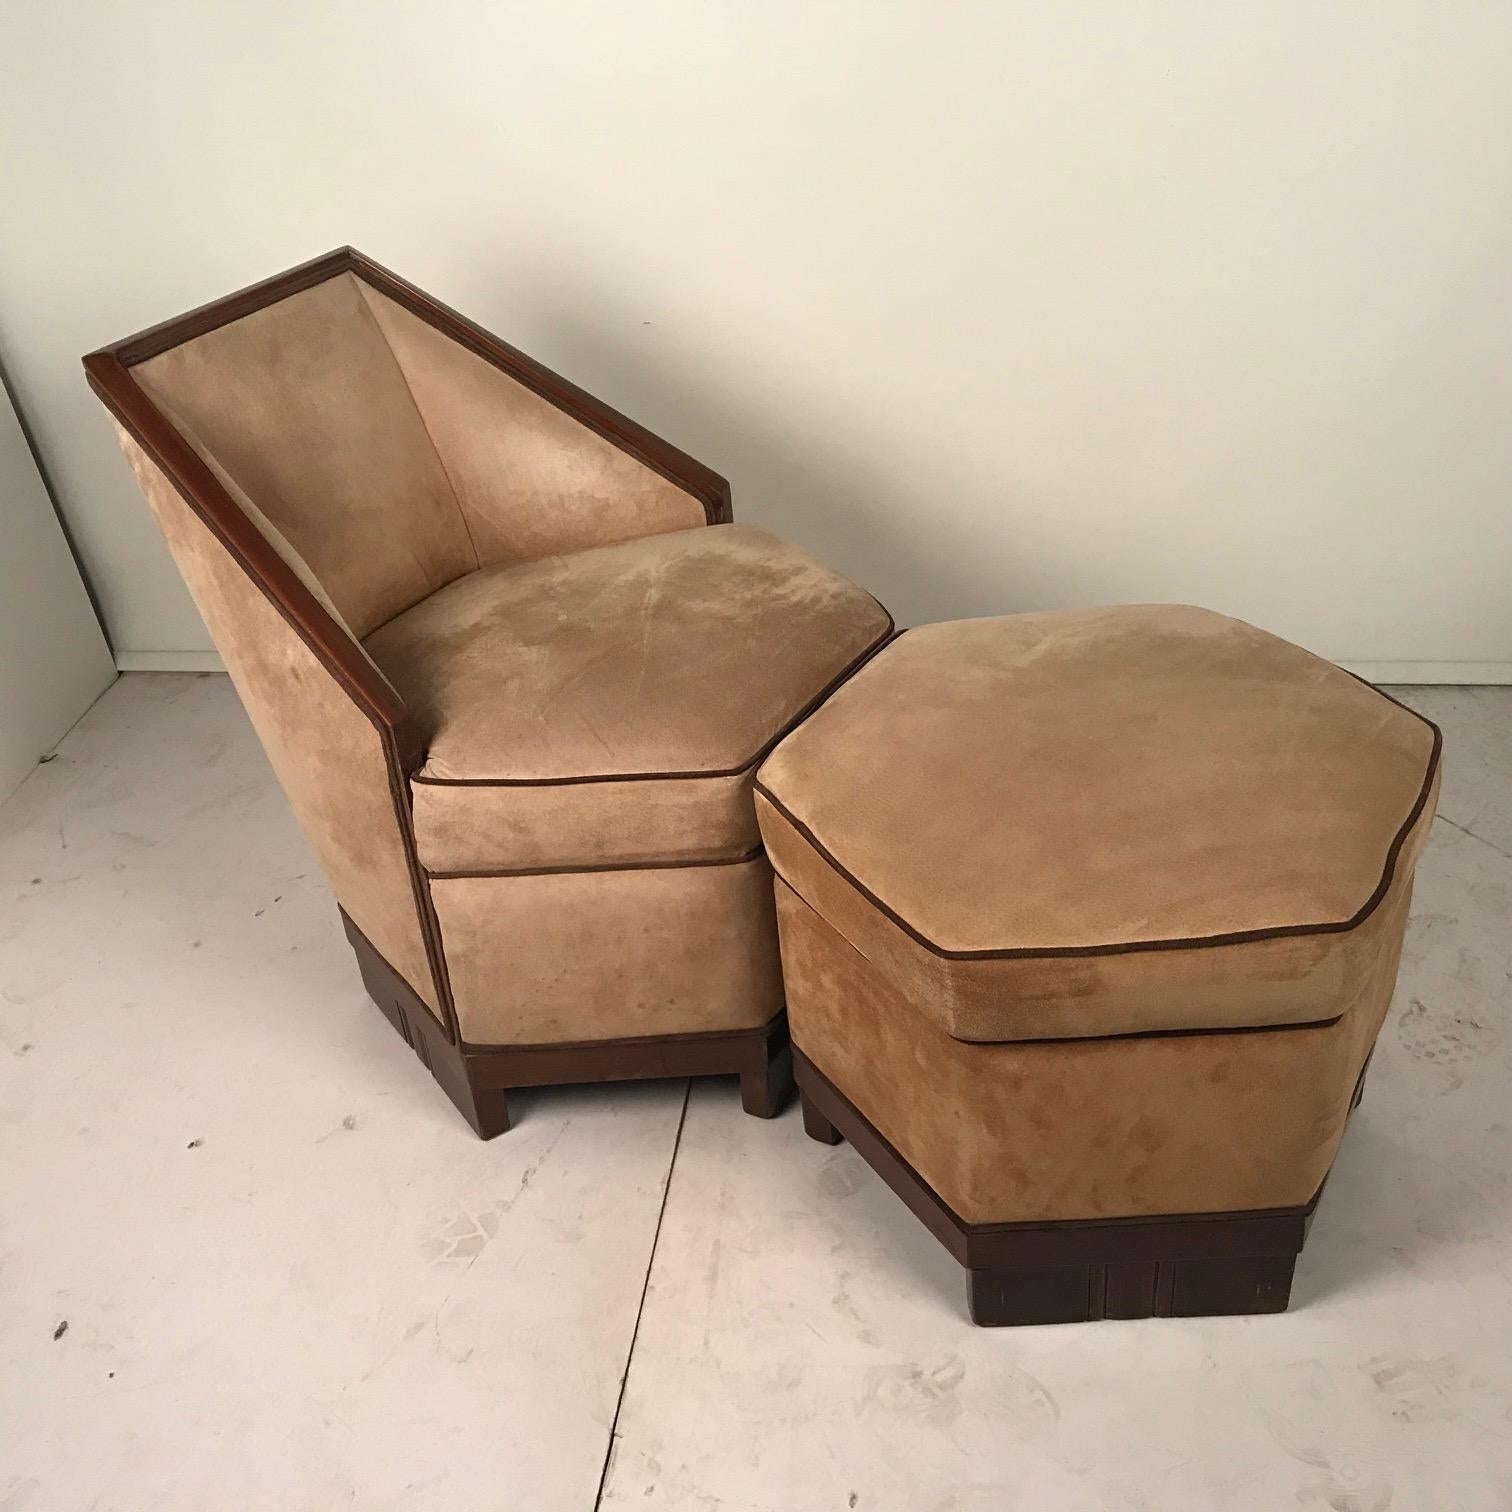 Early 20th Century French Art Deco Armchair and Ottoman by Saddier